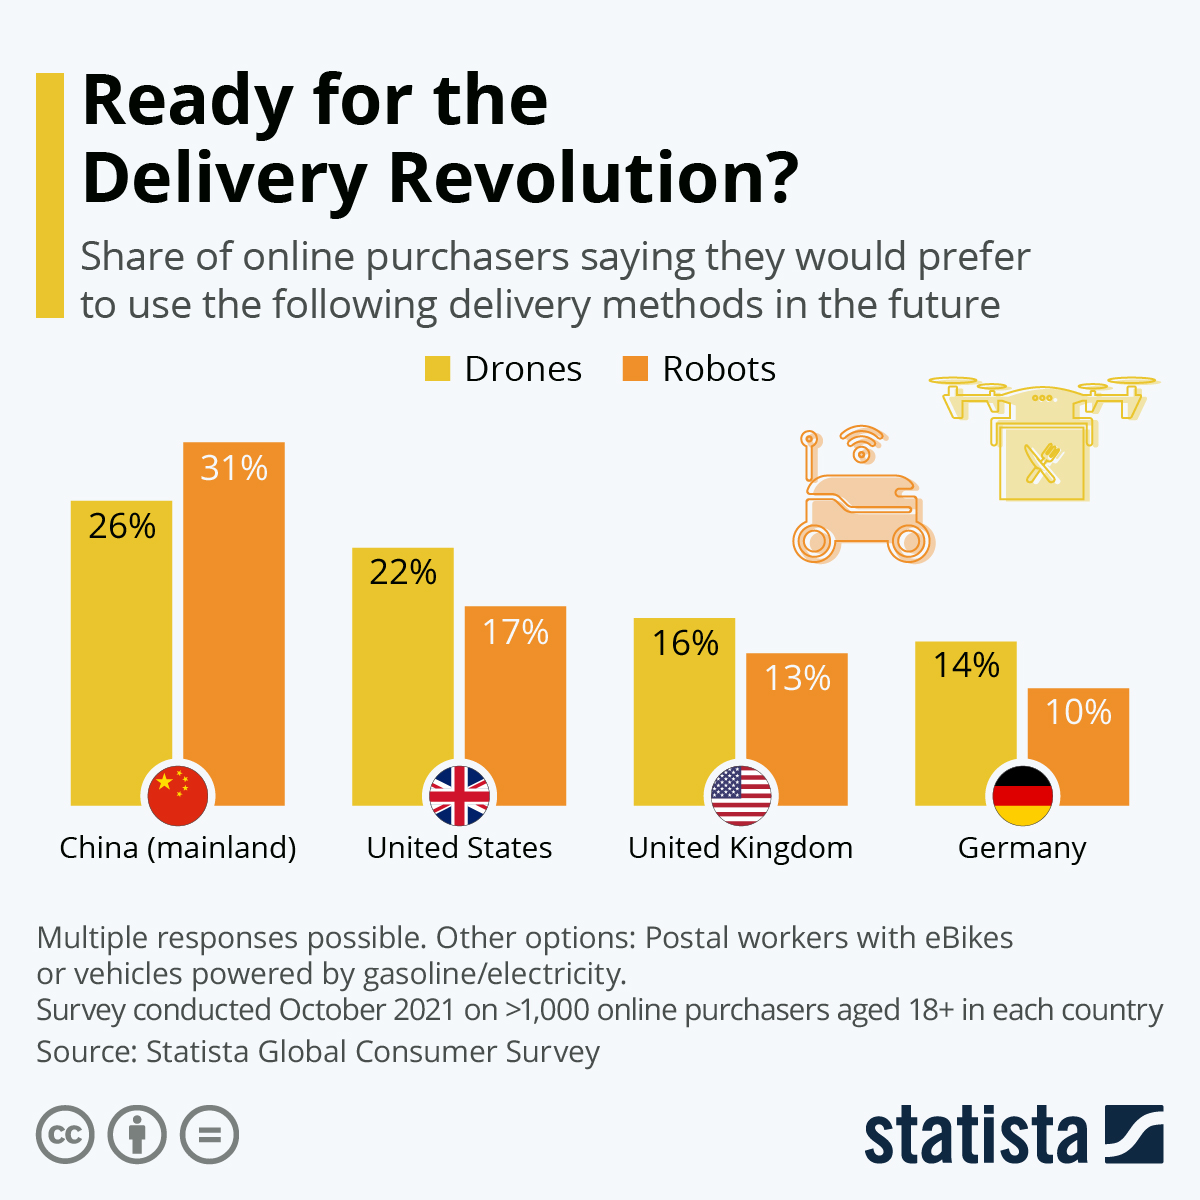 Ready for the Delivery Revolution?